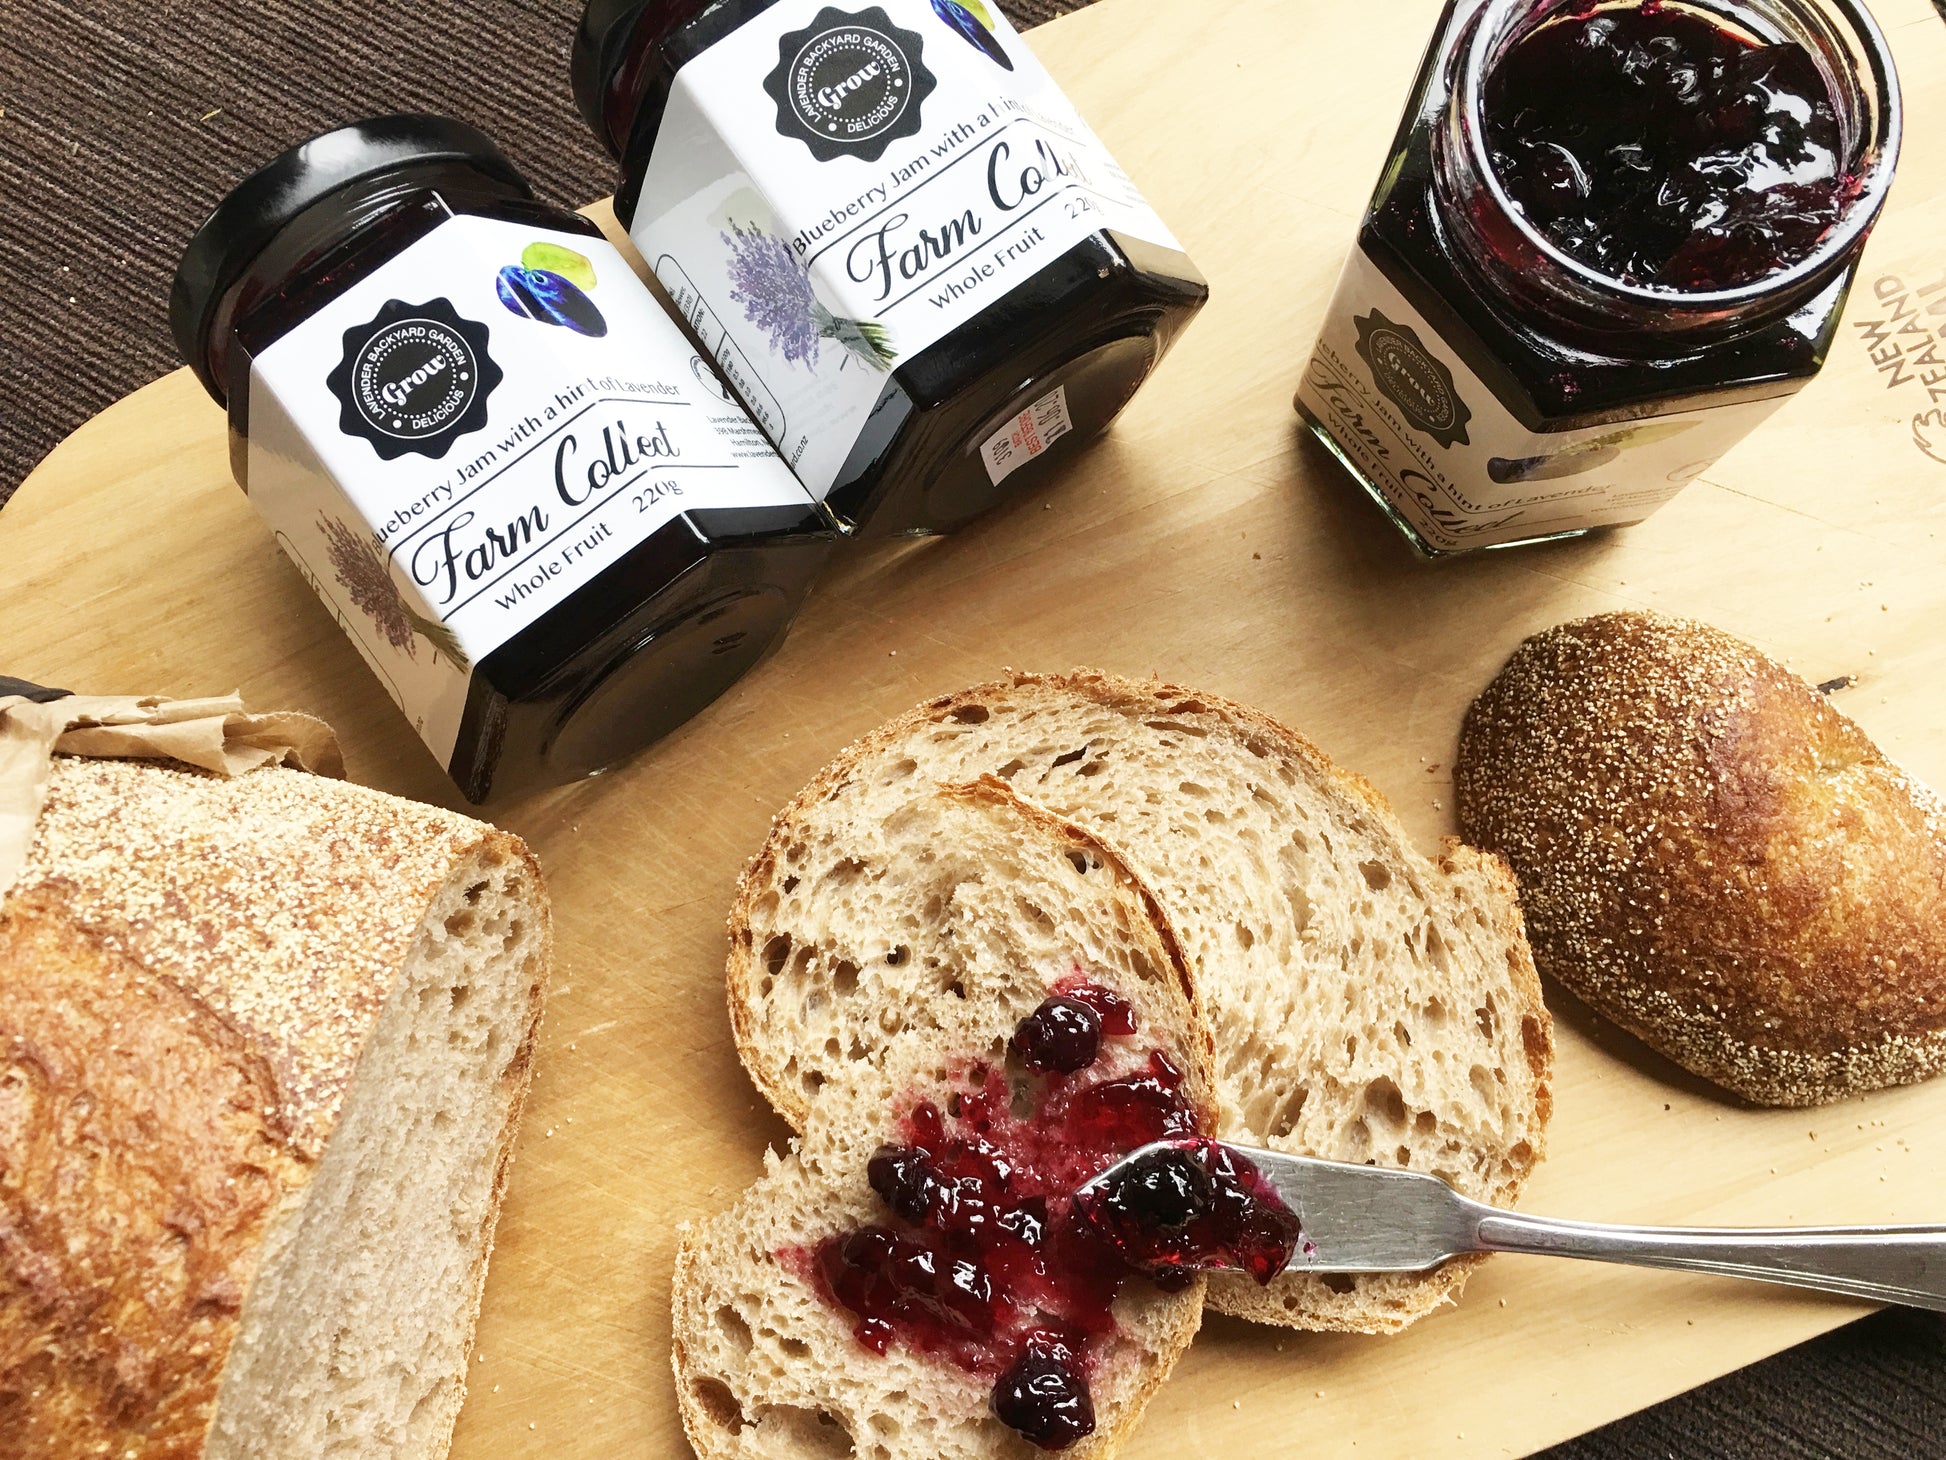 Blueberry Jam with a hint of lavender from NZ lavender farm